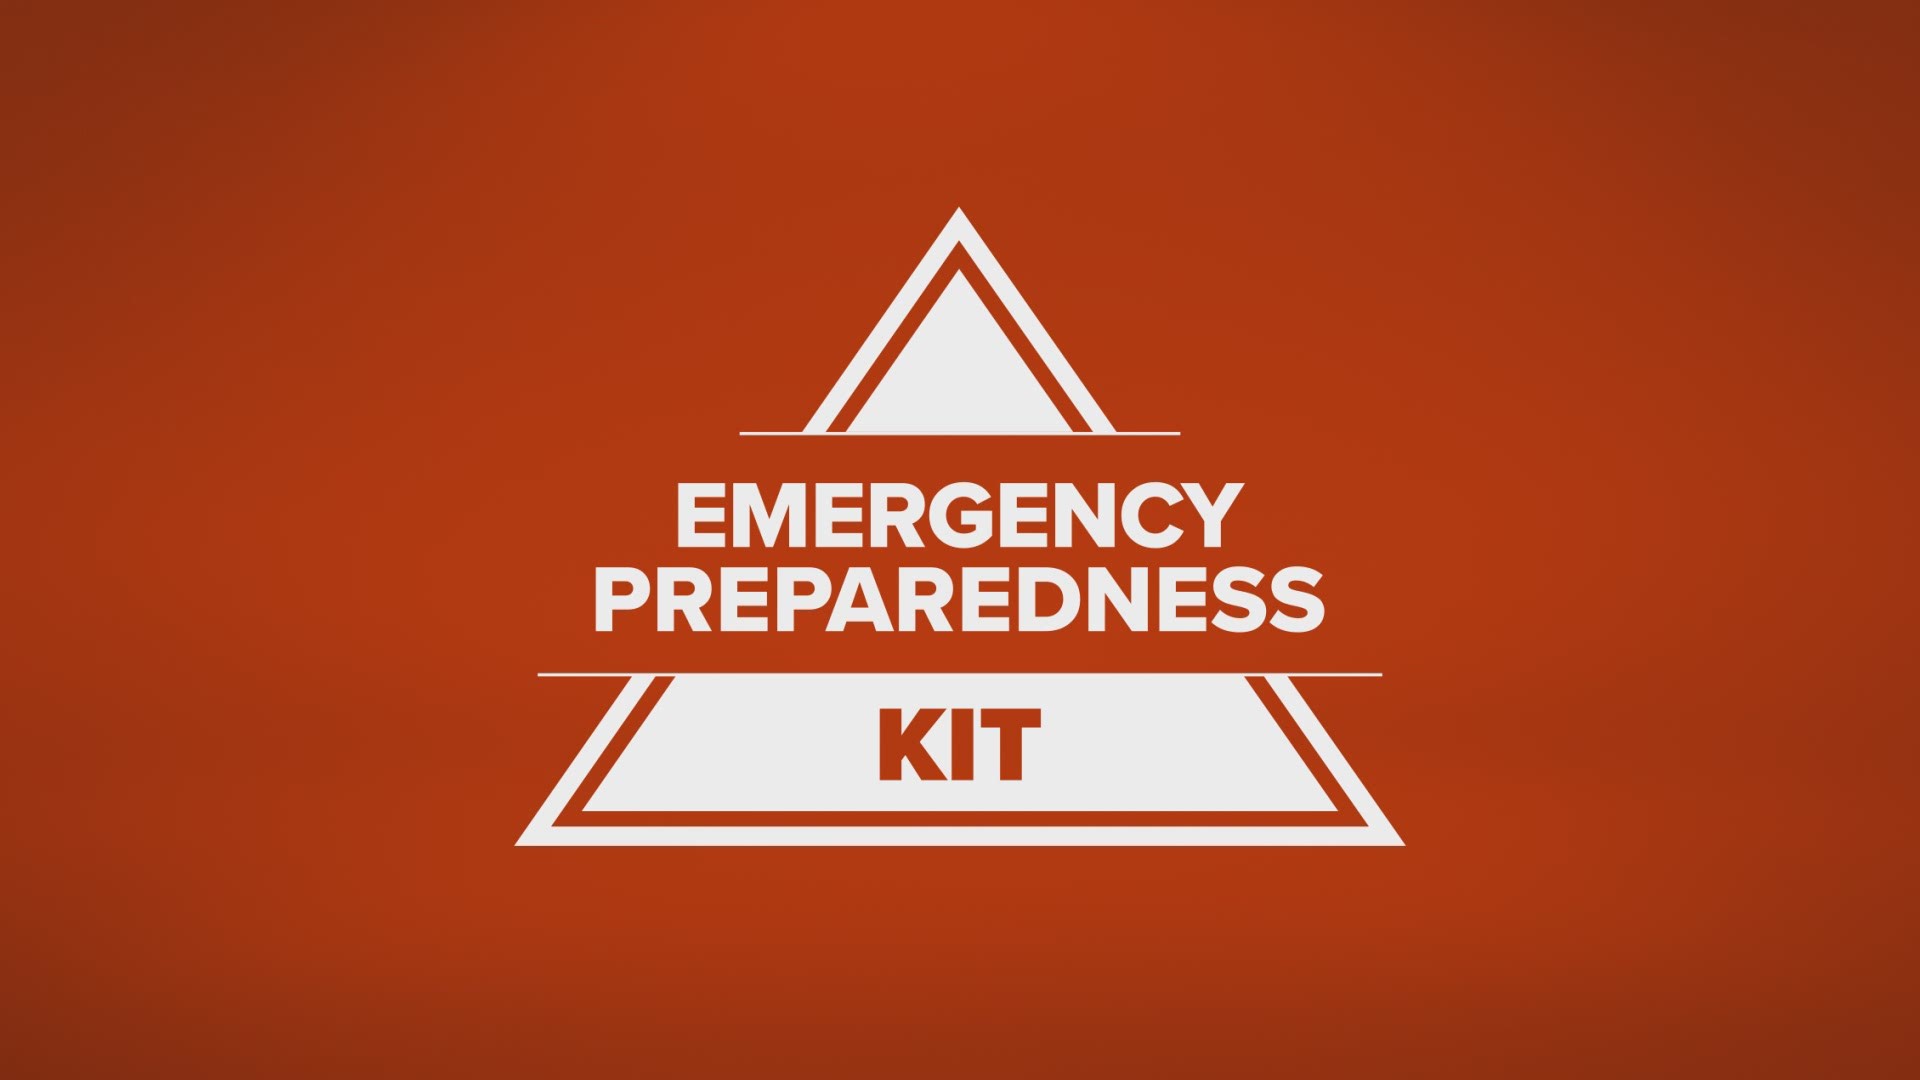 As wildfire season in Arizona begins, it's important to keep an emergency preparedness kit handy. Here are some items to include in this wildfire placeholder.